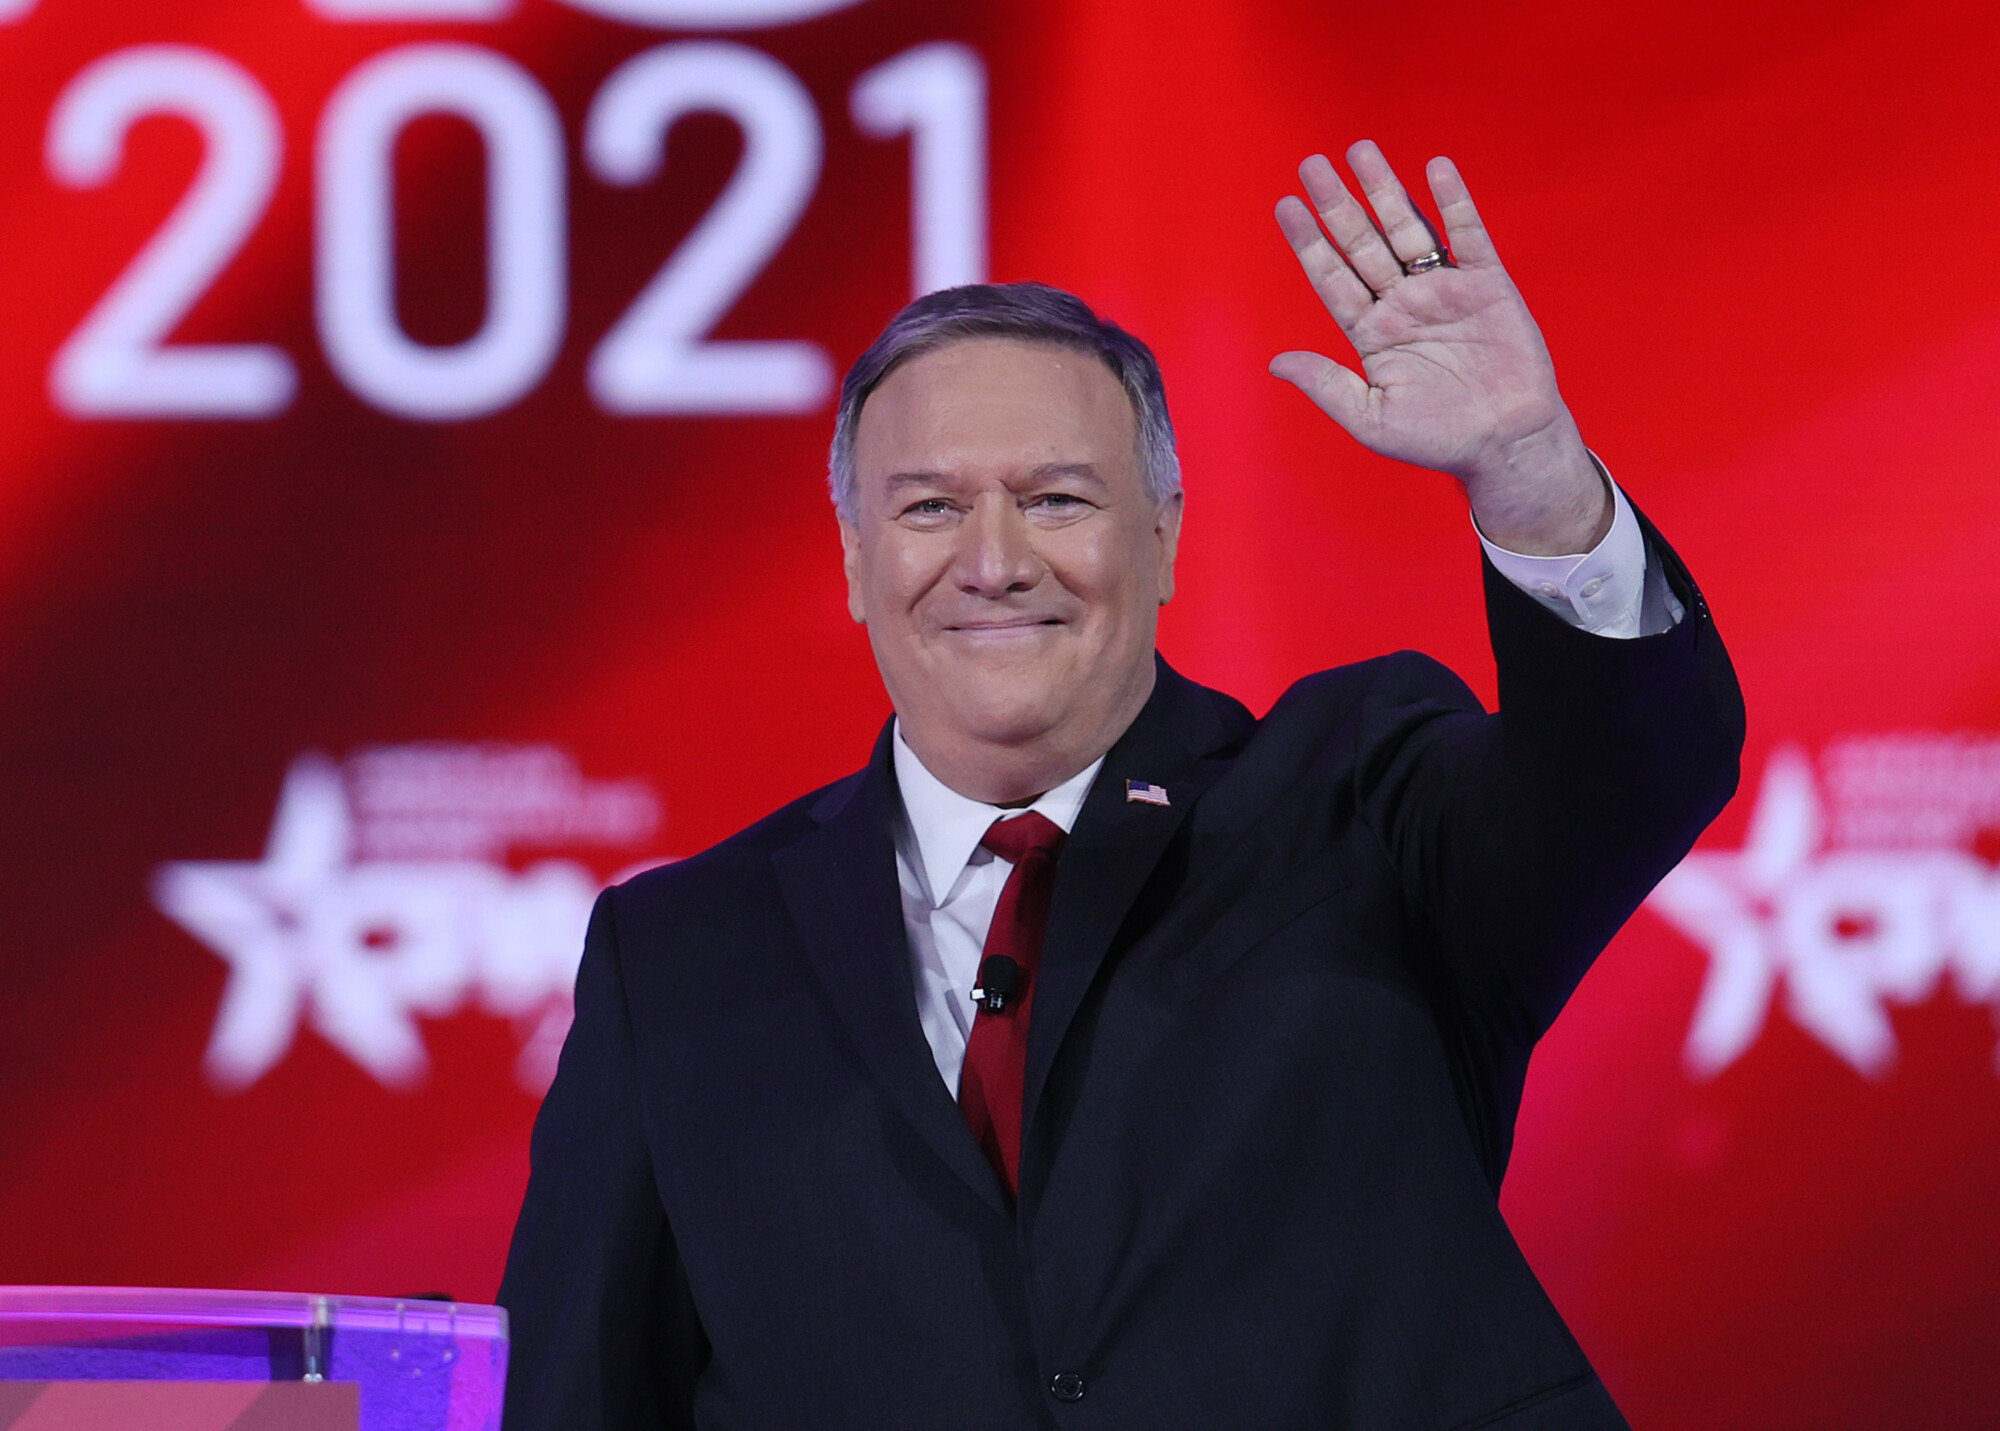 Be a ‘Pipe Hitter’ and Never Give Up: Pompeo